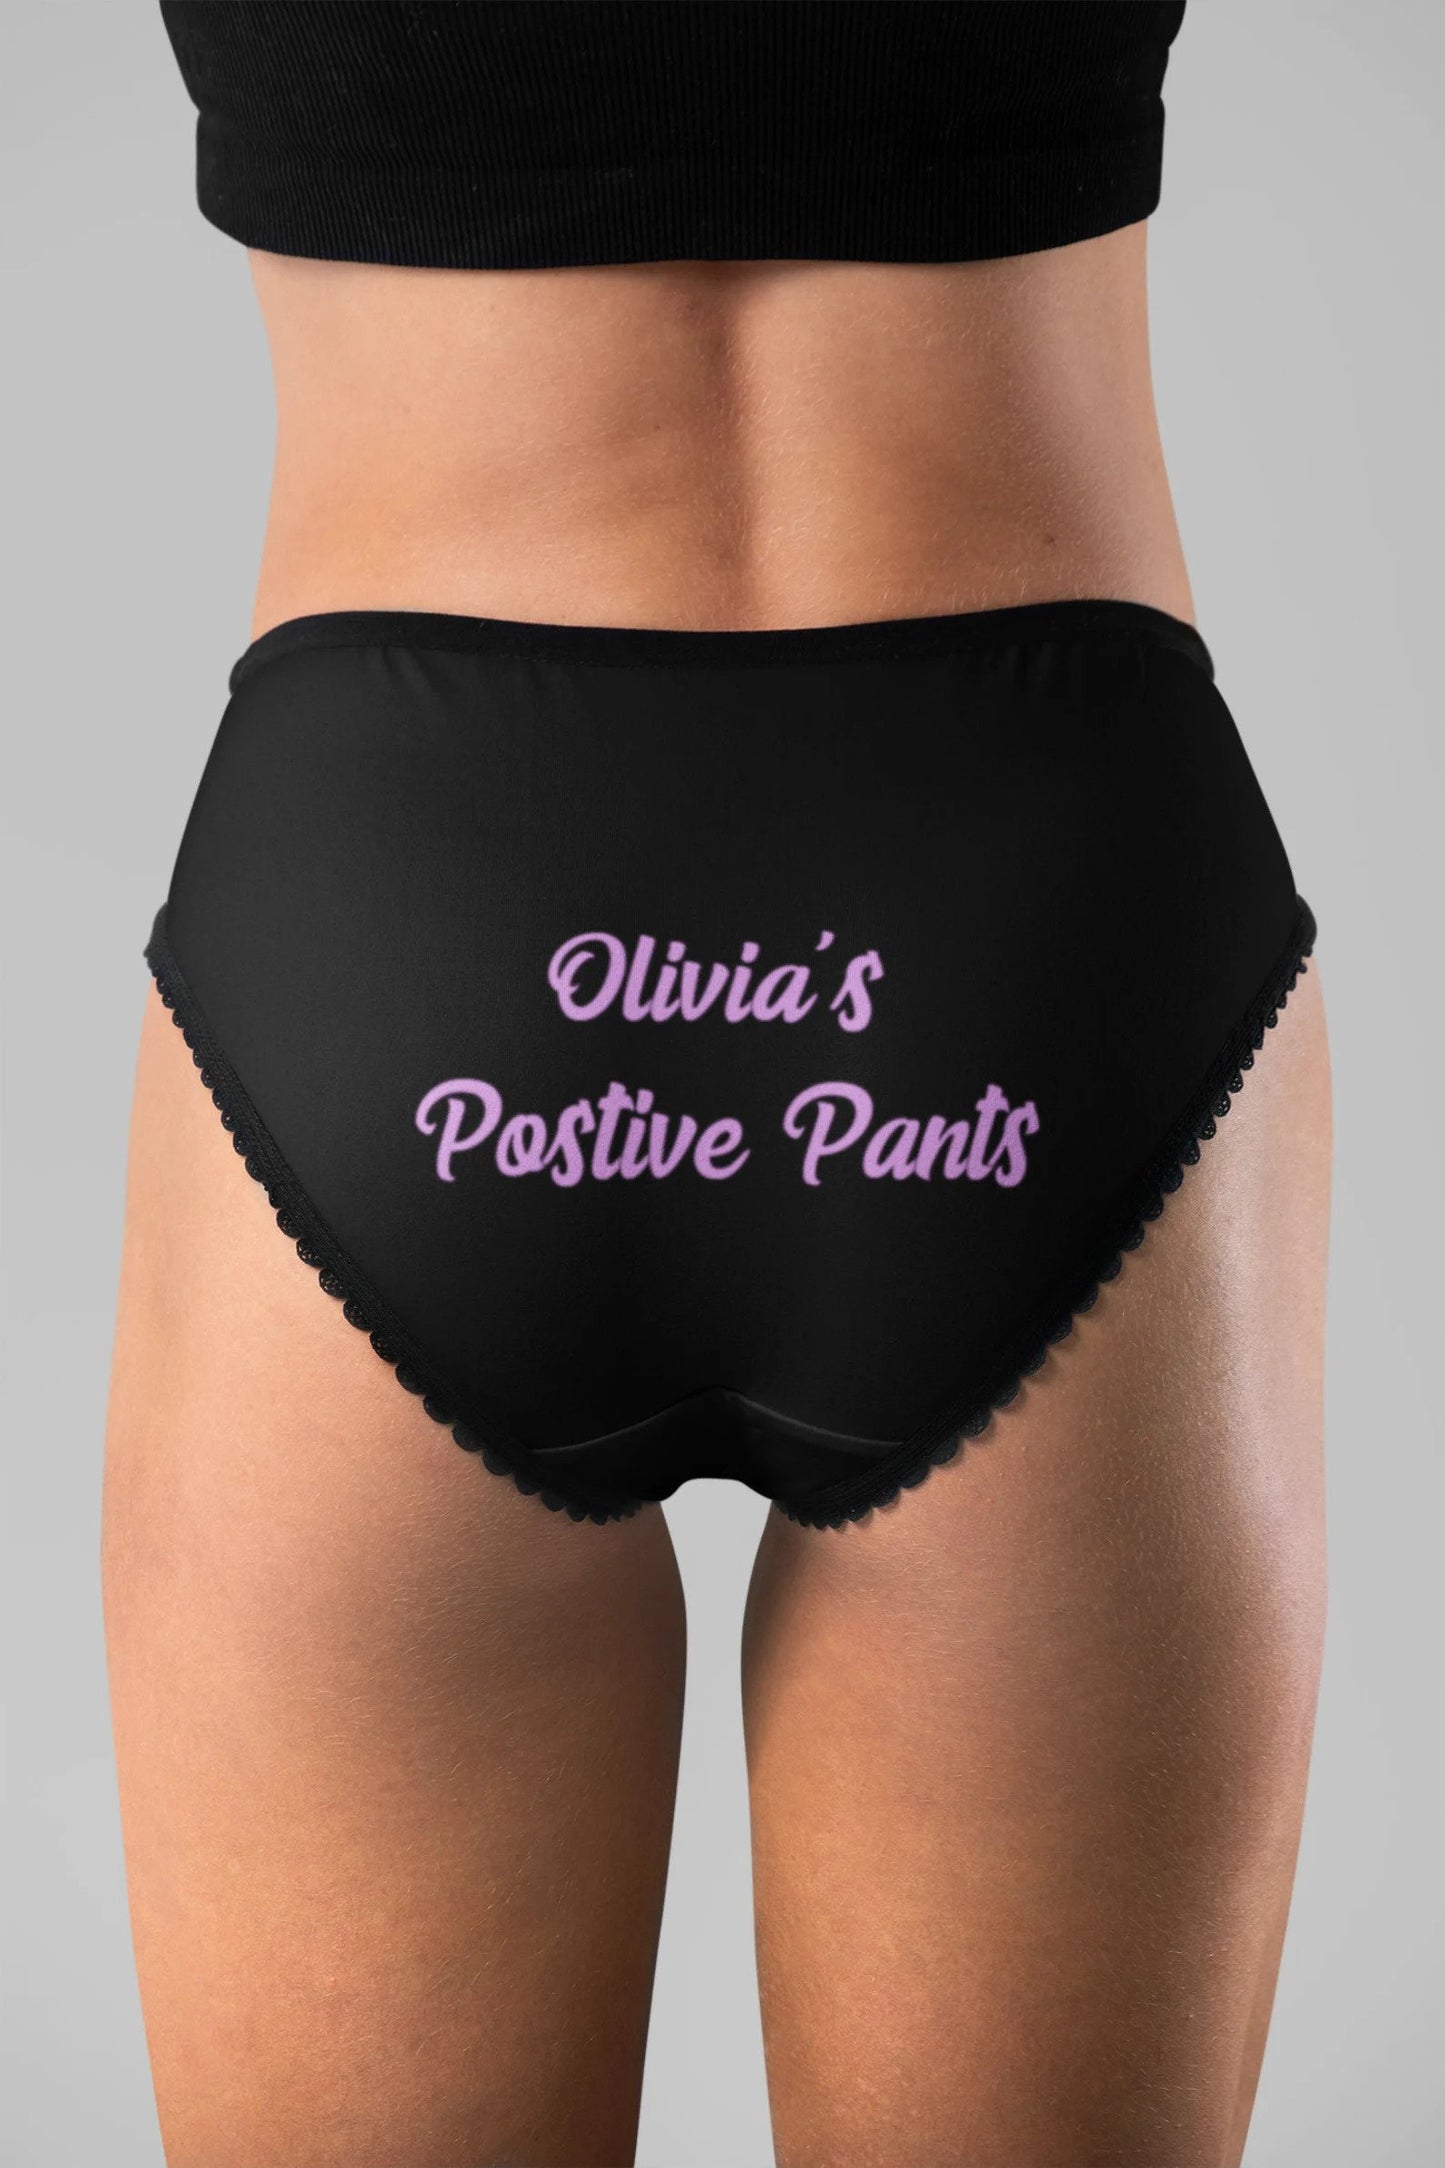 Personalised Positive Pants Knickers underwear – Liv & Me Personalised Gifts